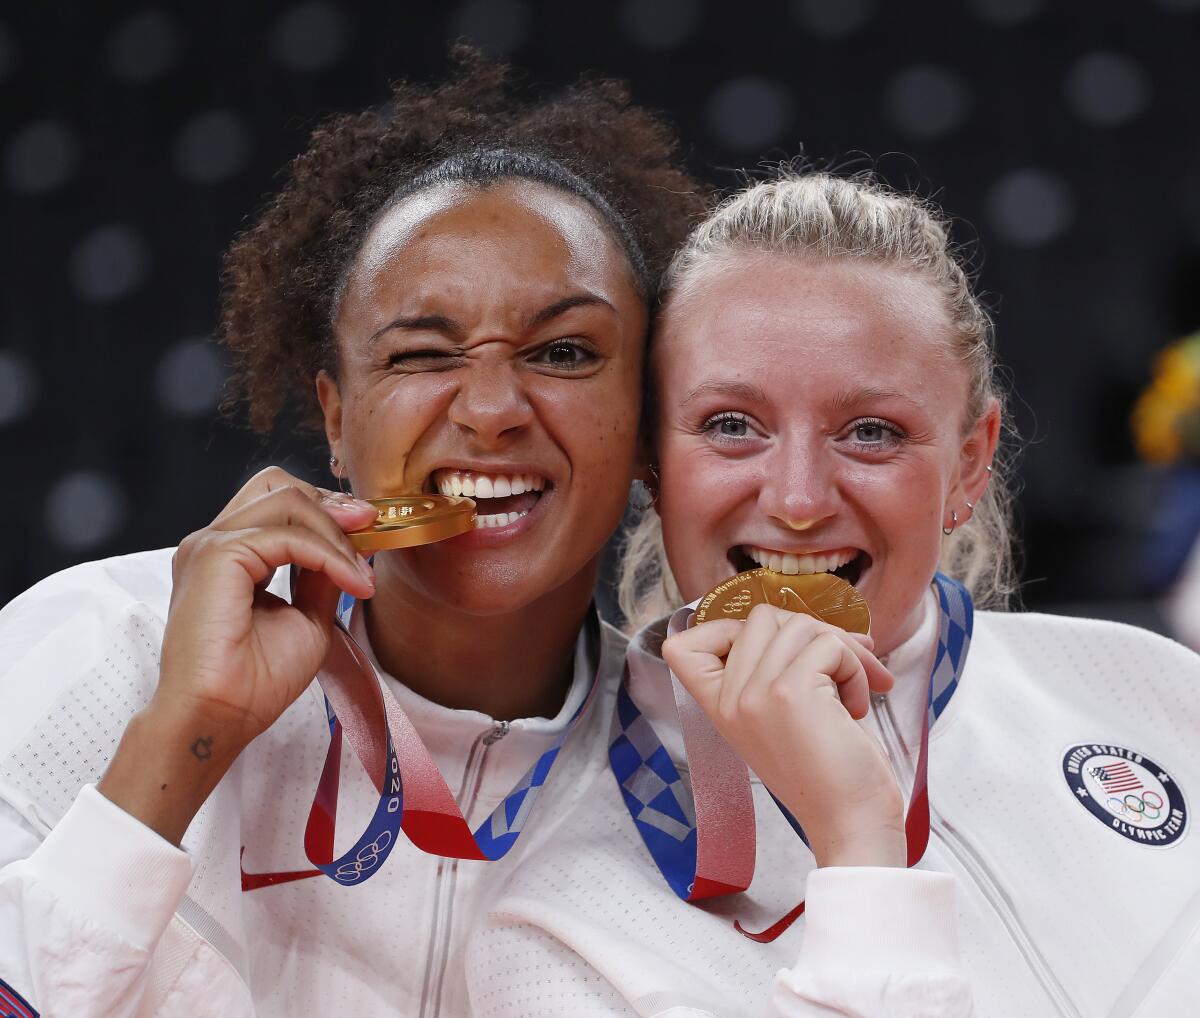 U.S. volleyball players Jordan Thompson and Jordyn Poulter bite their gold medals.